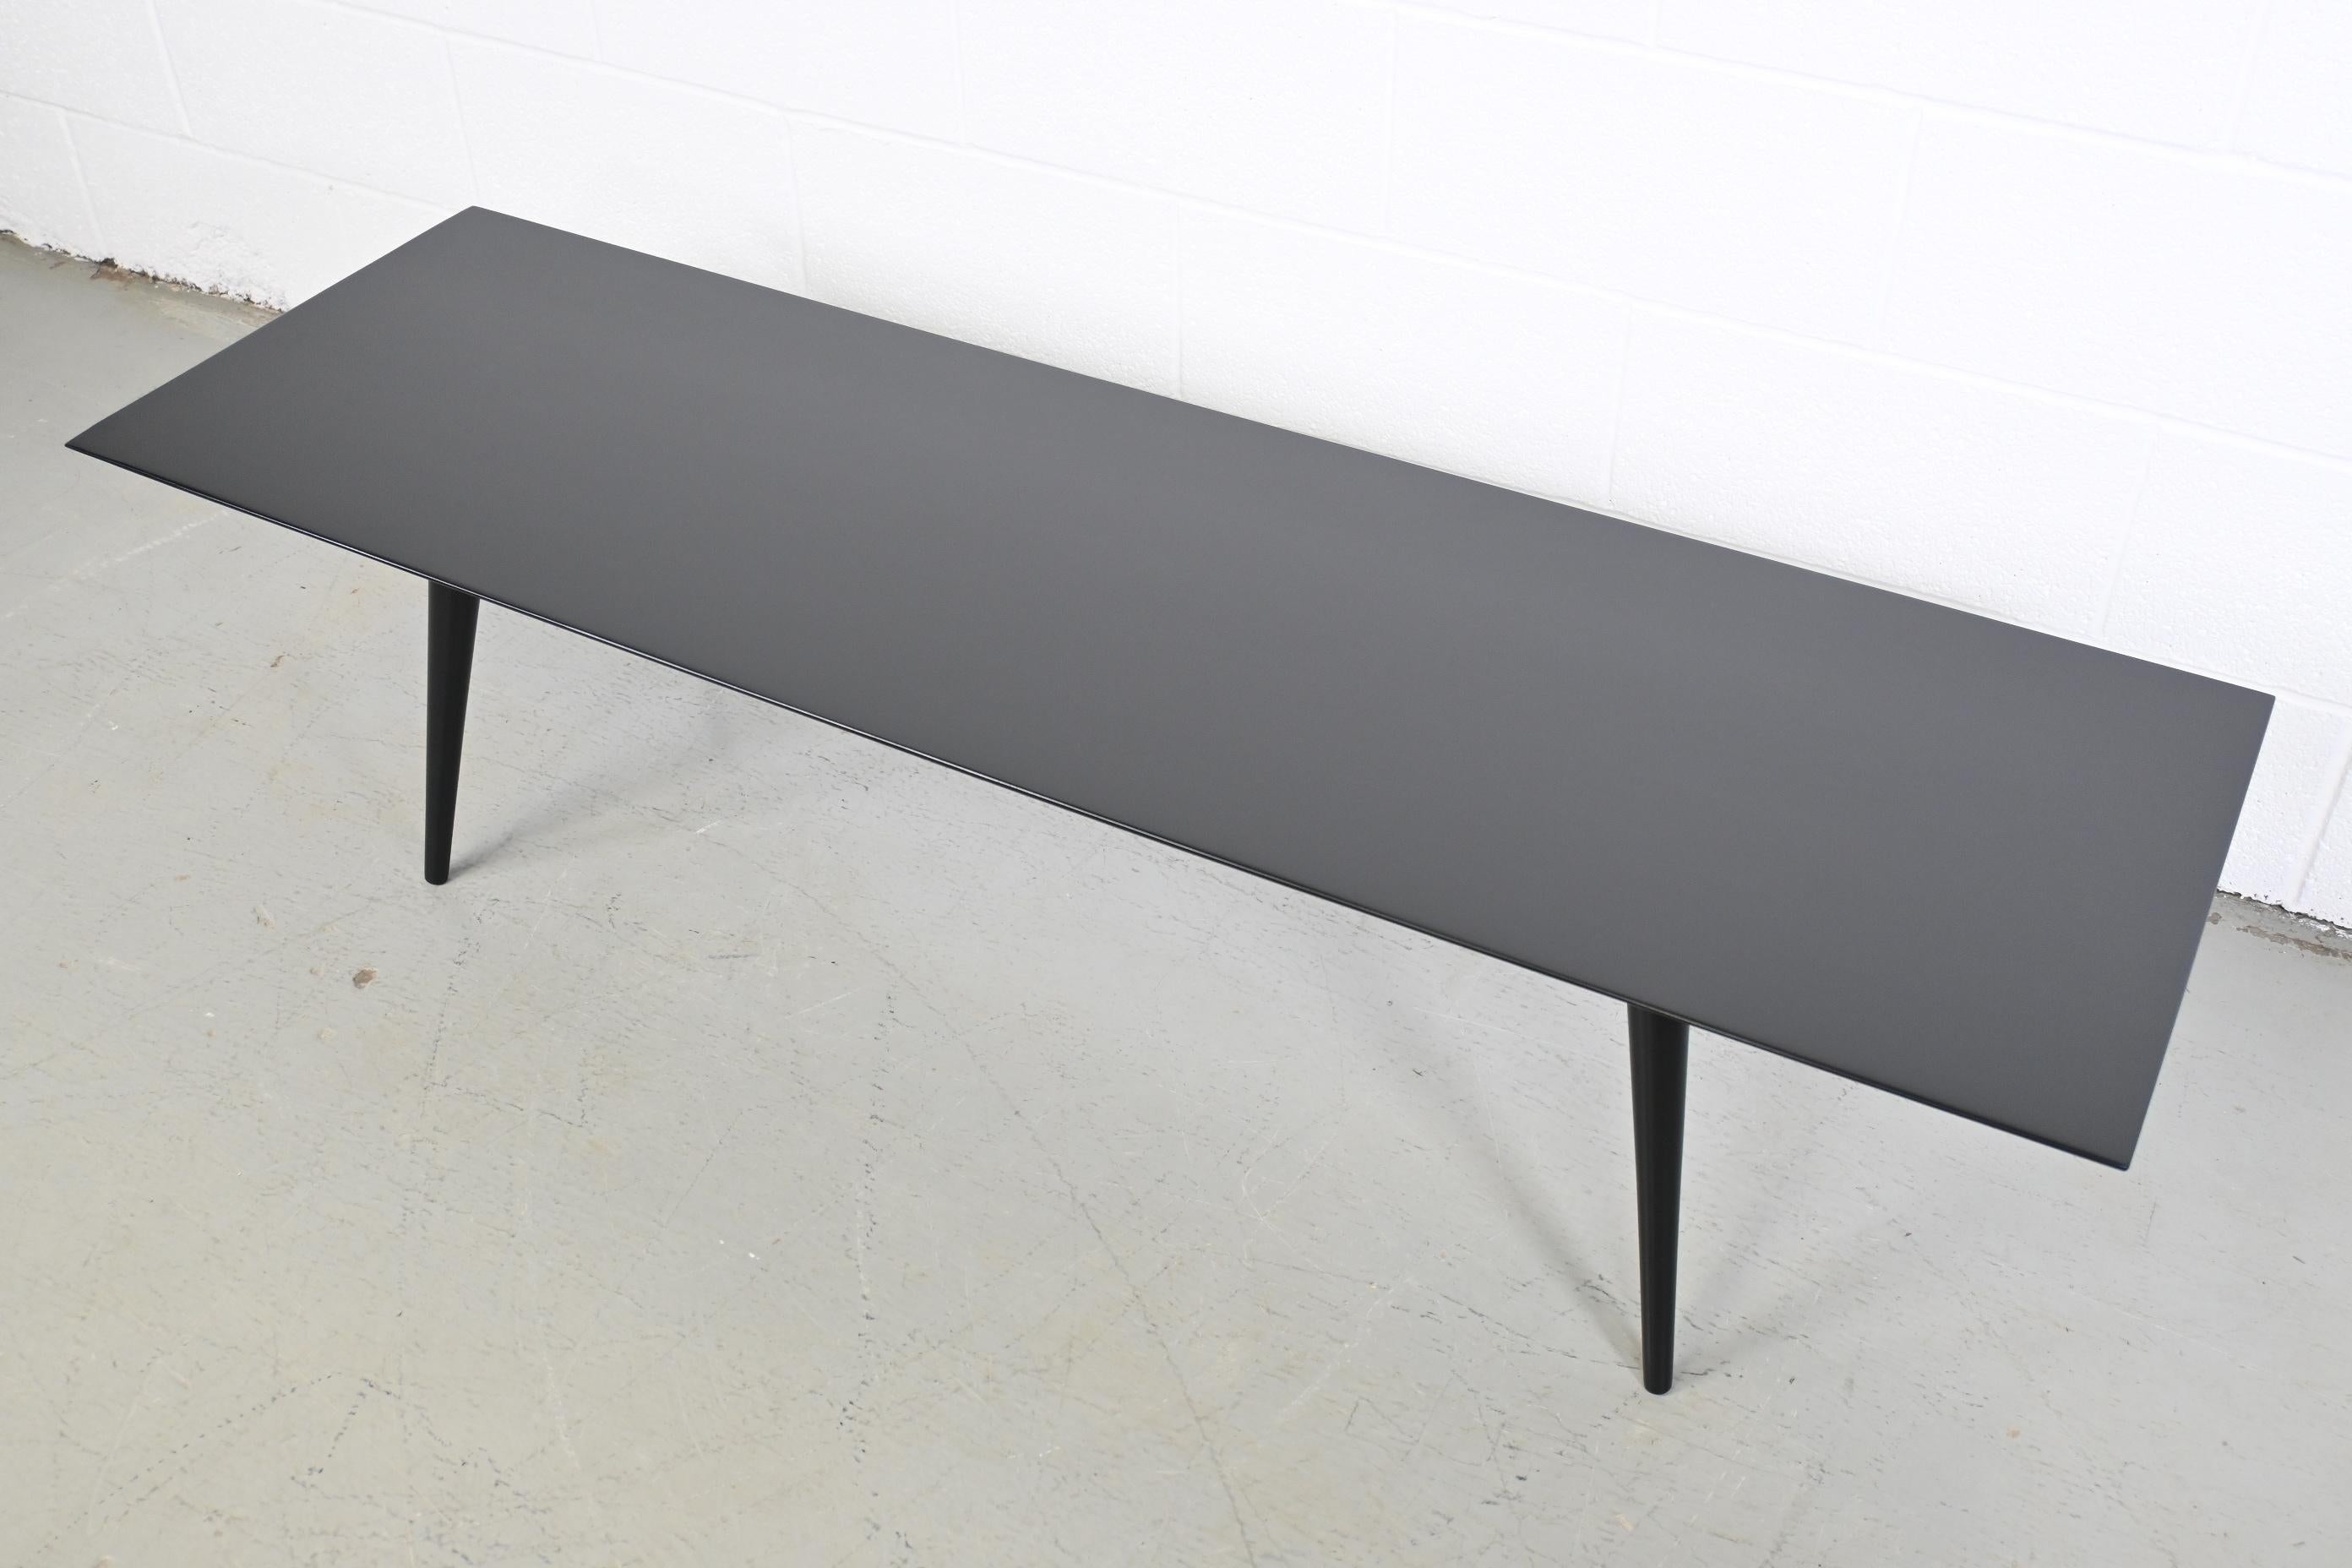 Paul McCobb Planner Group for Winchendon Furniture Mid Century Modern Black Lacquered Coffee Table

Winchendon Furniture, USA, 1950s

60 Wide x 18 Deep x 14.75 High

Solid birch mid century modern black lacquered coffee